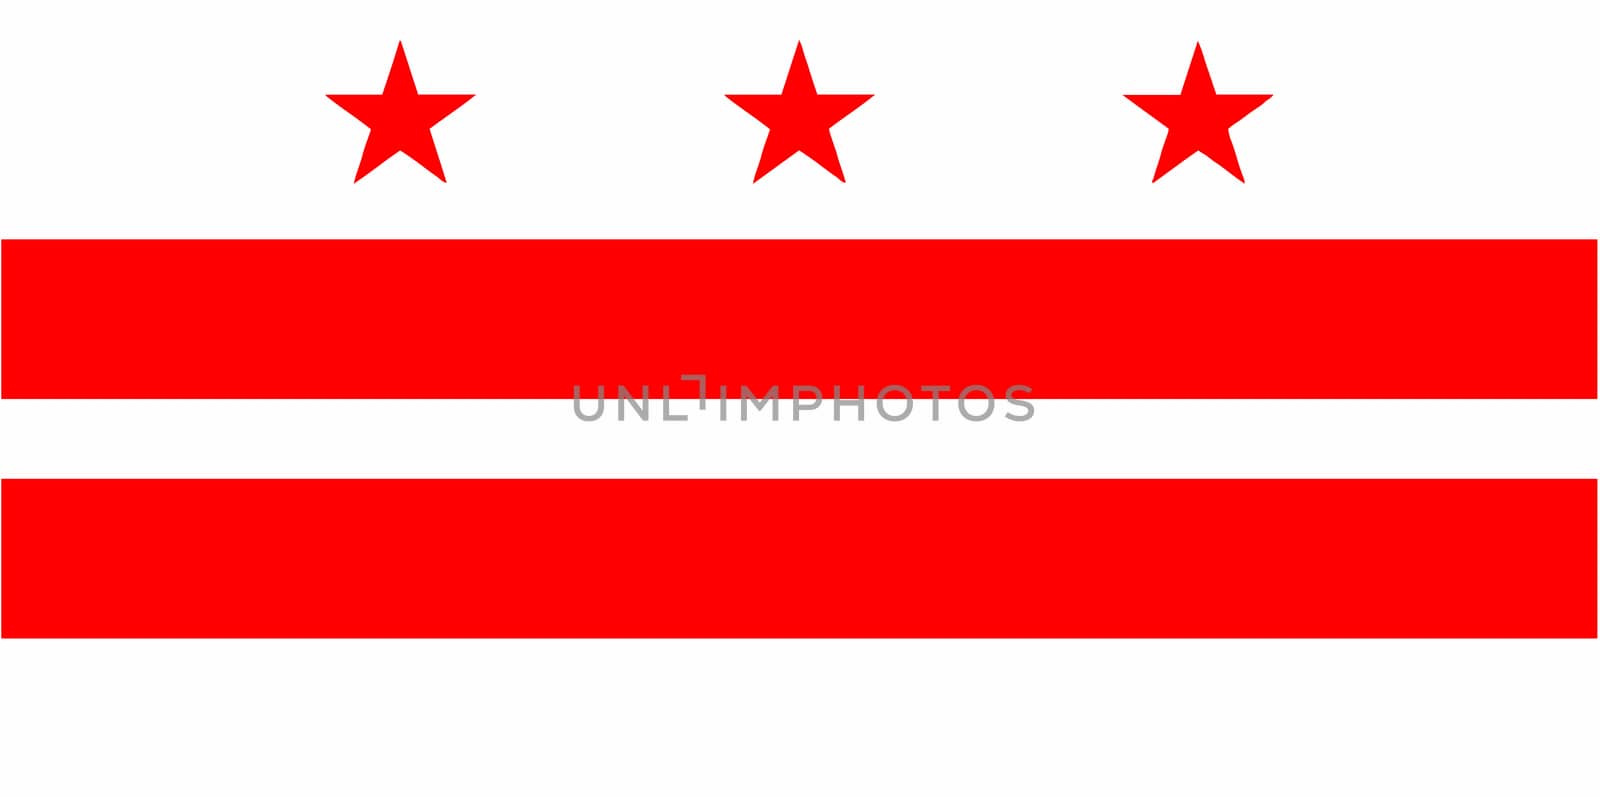 The Washington DC State Flag in red and white